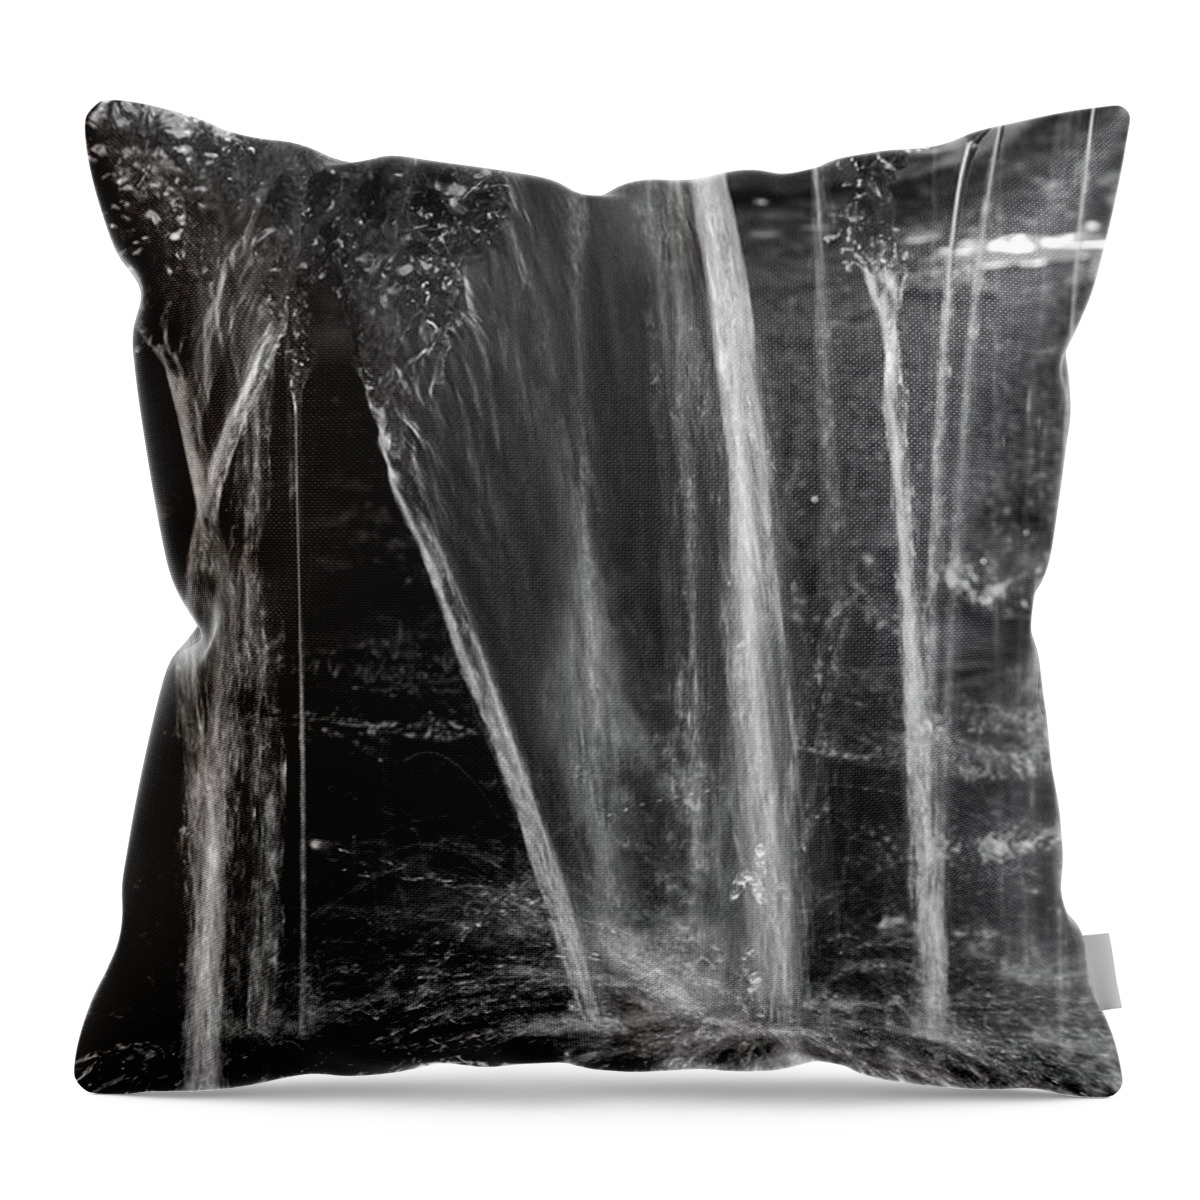 Falls Branch Falls Throw Pillow featuring the photograph Close Up Waterfall by Phil Perkins